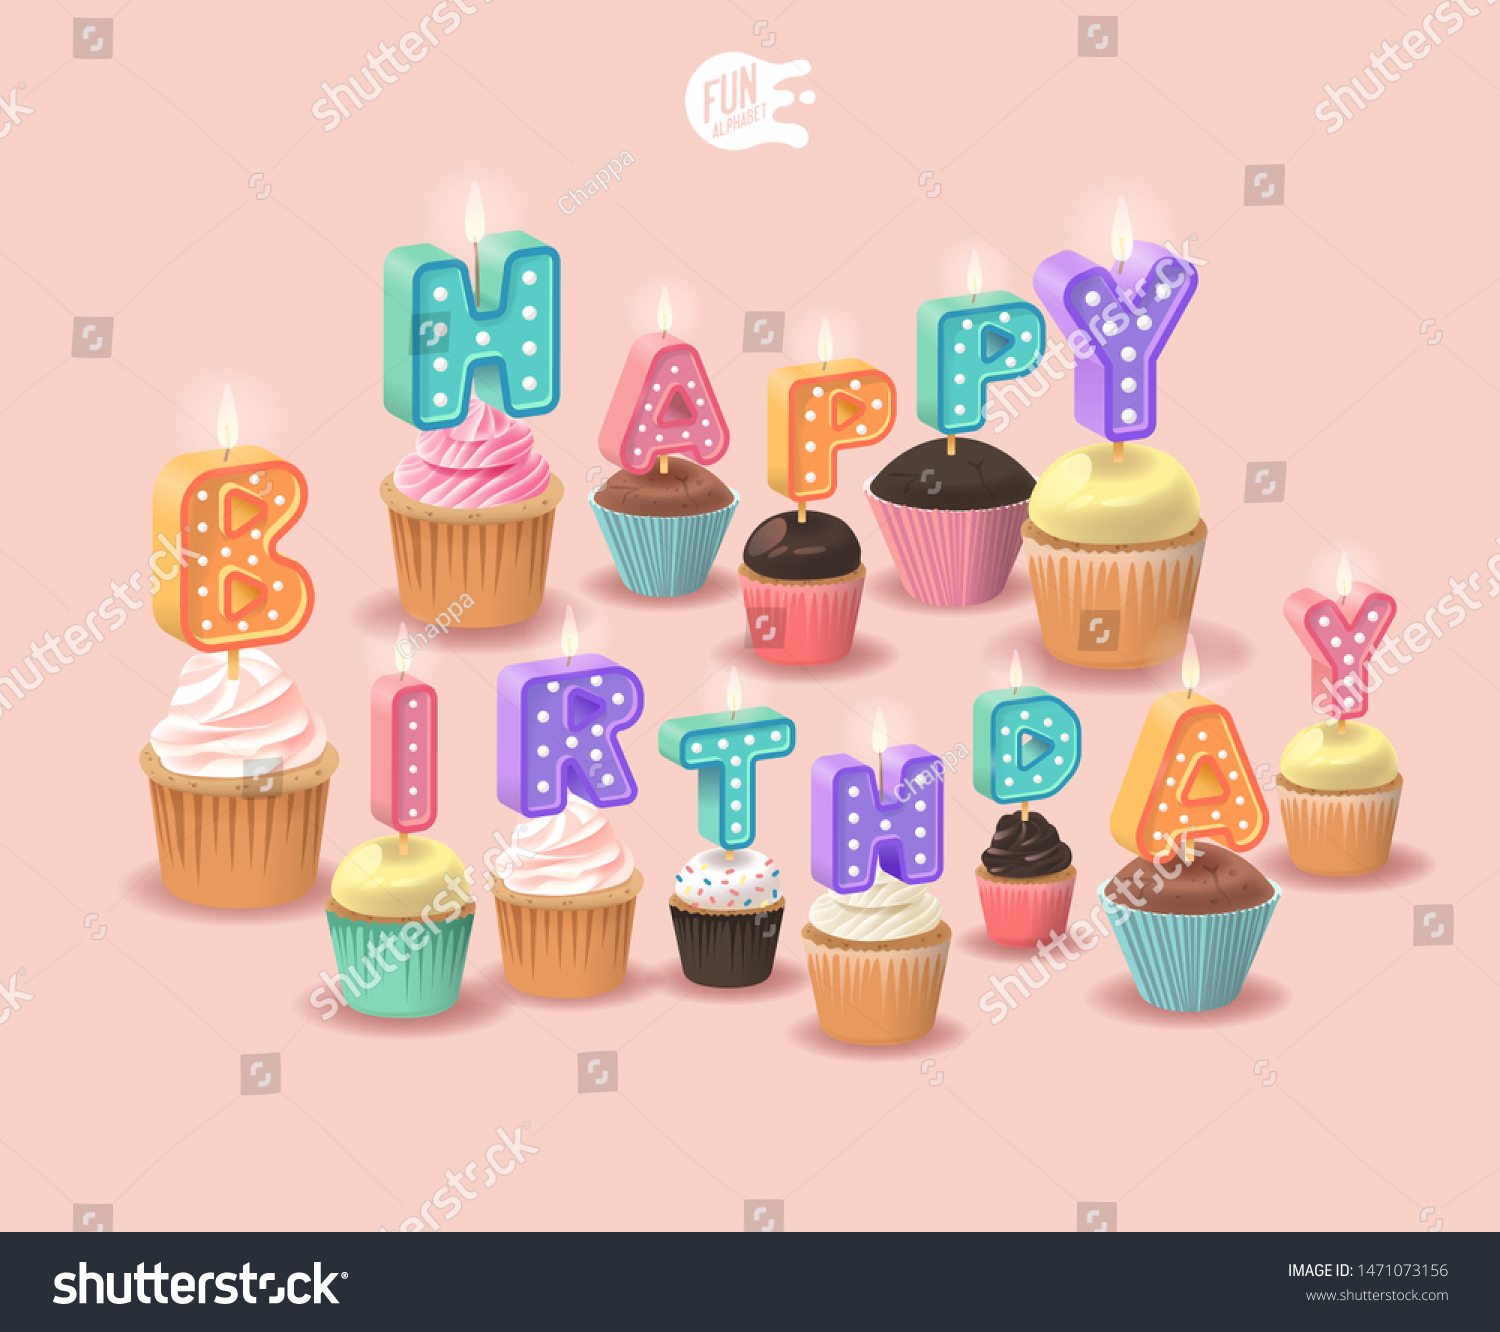 SVG of Happy Birthday Candle 3D Letters On A Pink Background. Set For A Candy Bar. Font For Celebration. Realistic Collection for A Children's Party. Baby Shower. Muffin With Candle. 3D Sweet Alphabet ABC svg